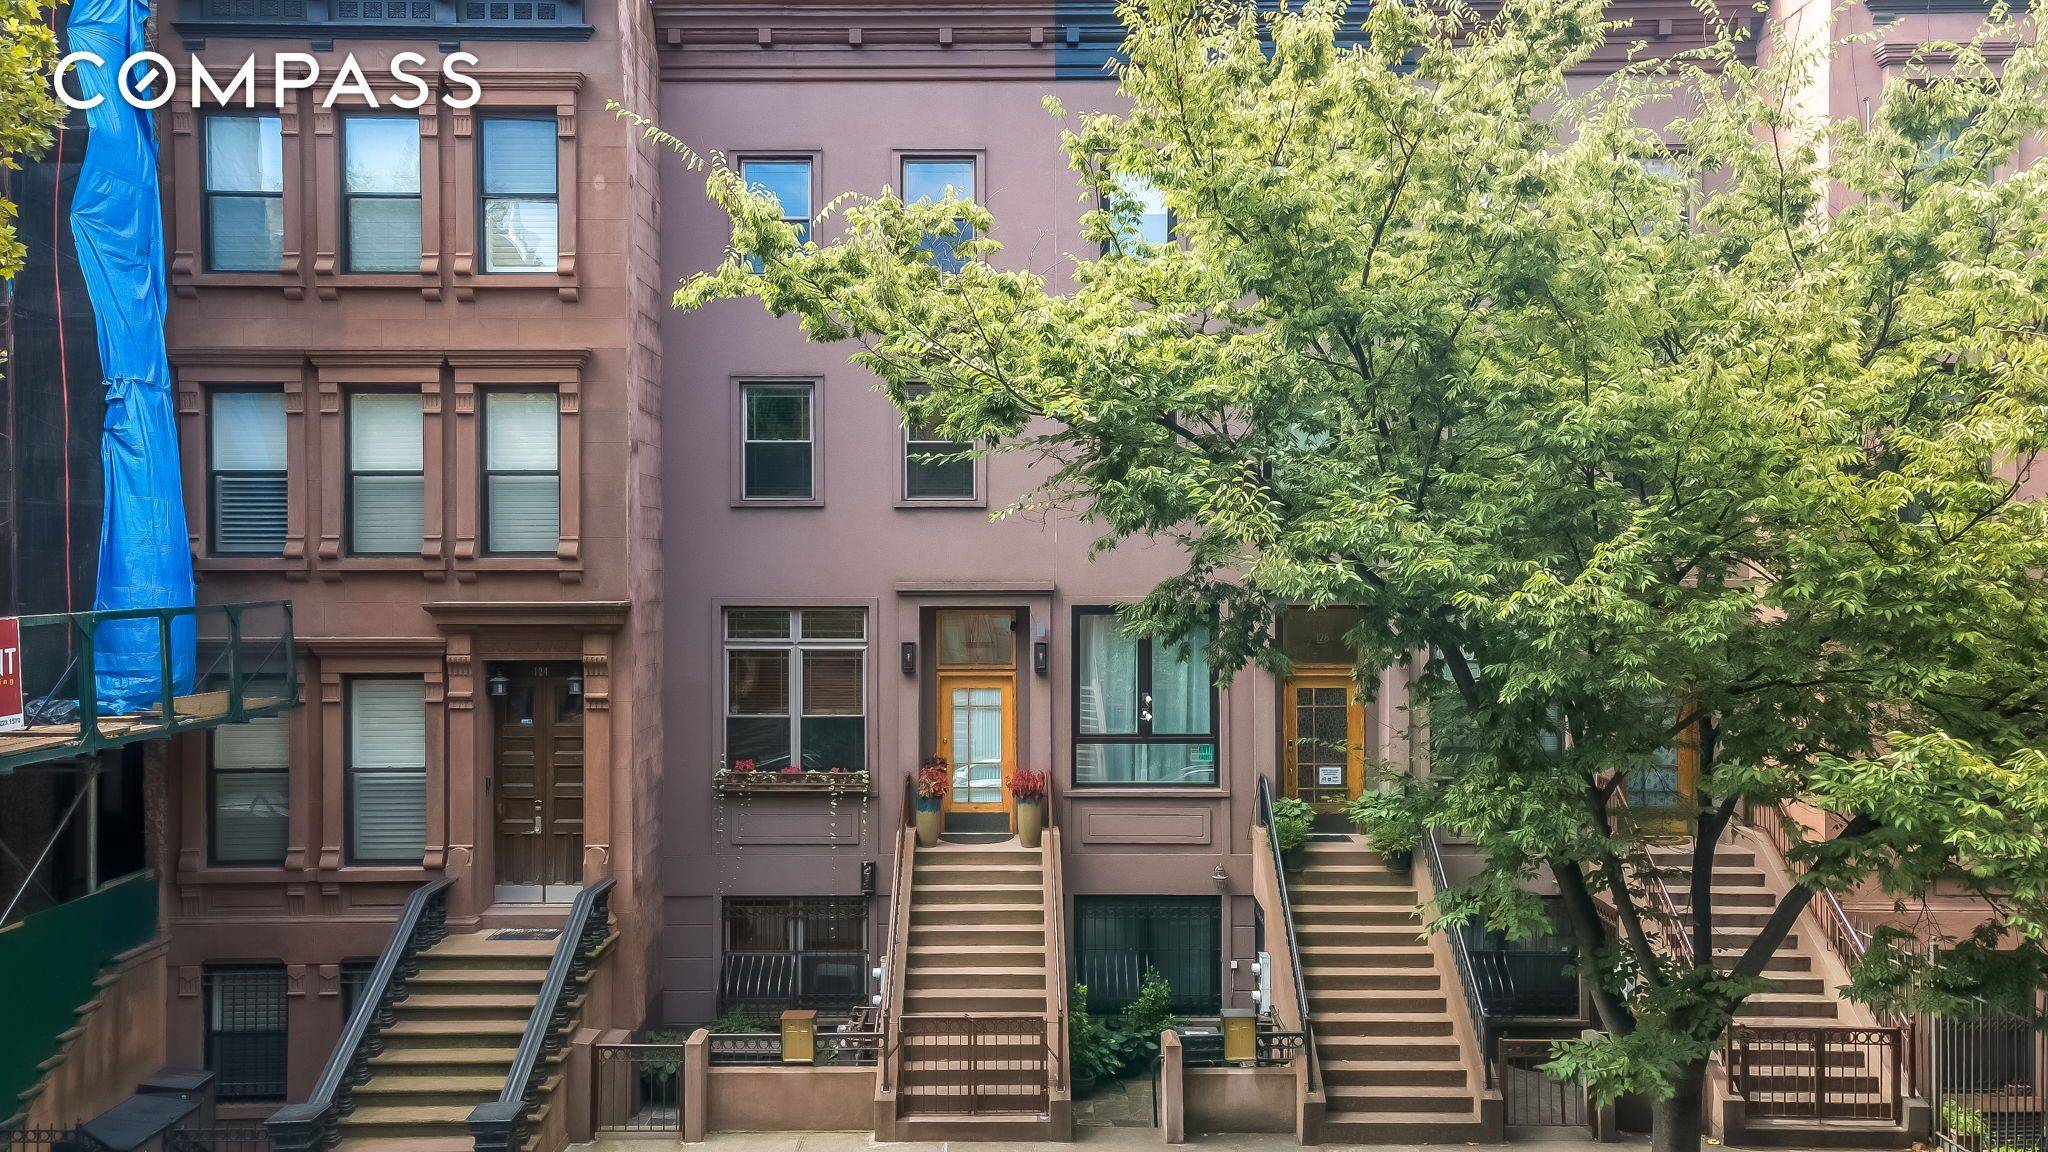 Introducing 126 W 132nd Street A Modern Oasis in the Heart of History Nestled within this historic Central Harlem, a stunning townhome was meticulously crafted from the ground up in ...